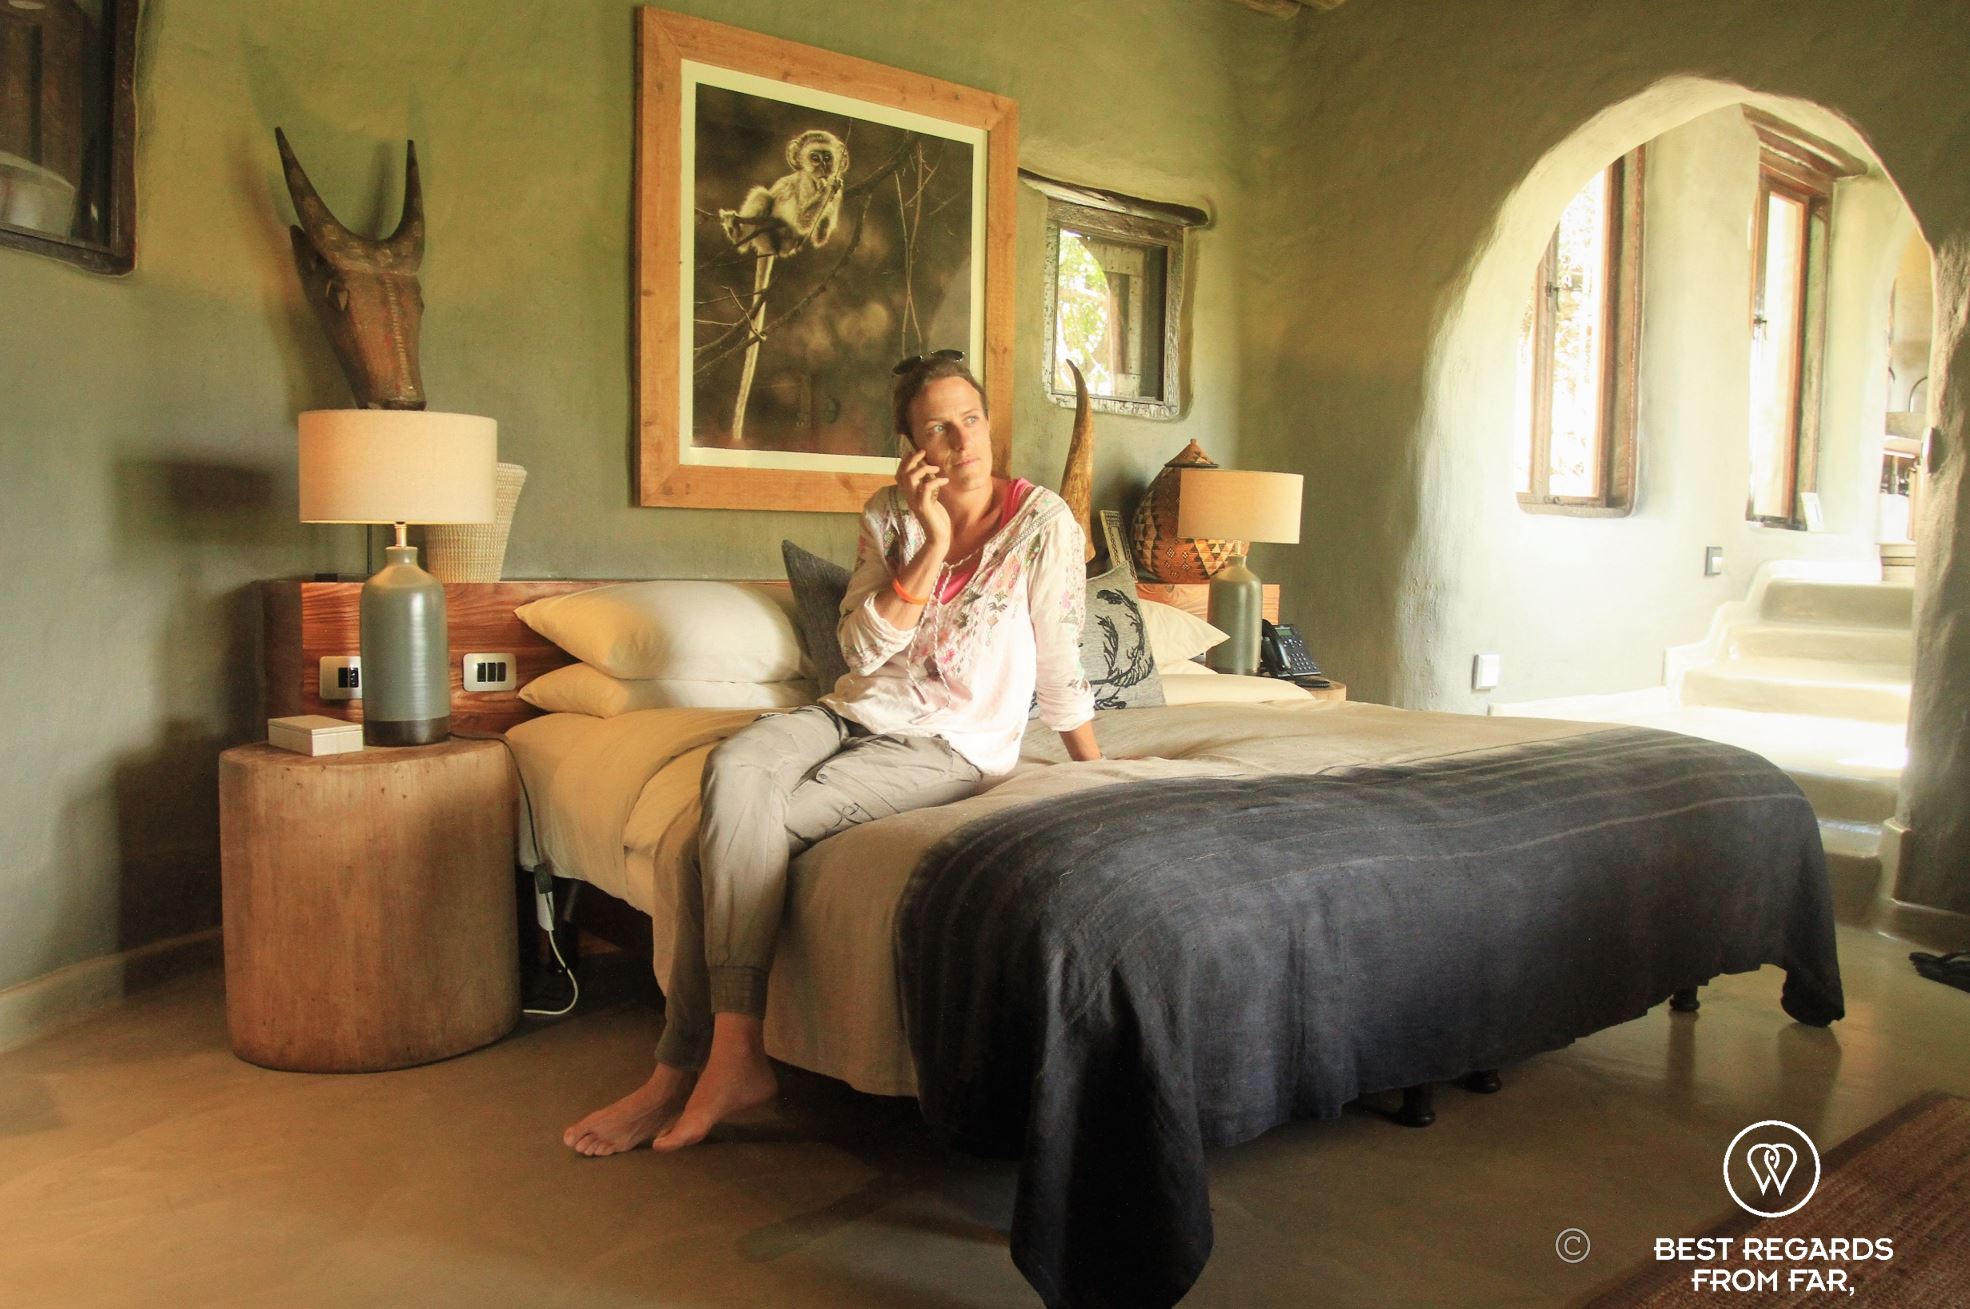 Photographer Marcella van Alphen on a bed in a luxurious room making a phone call.